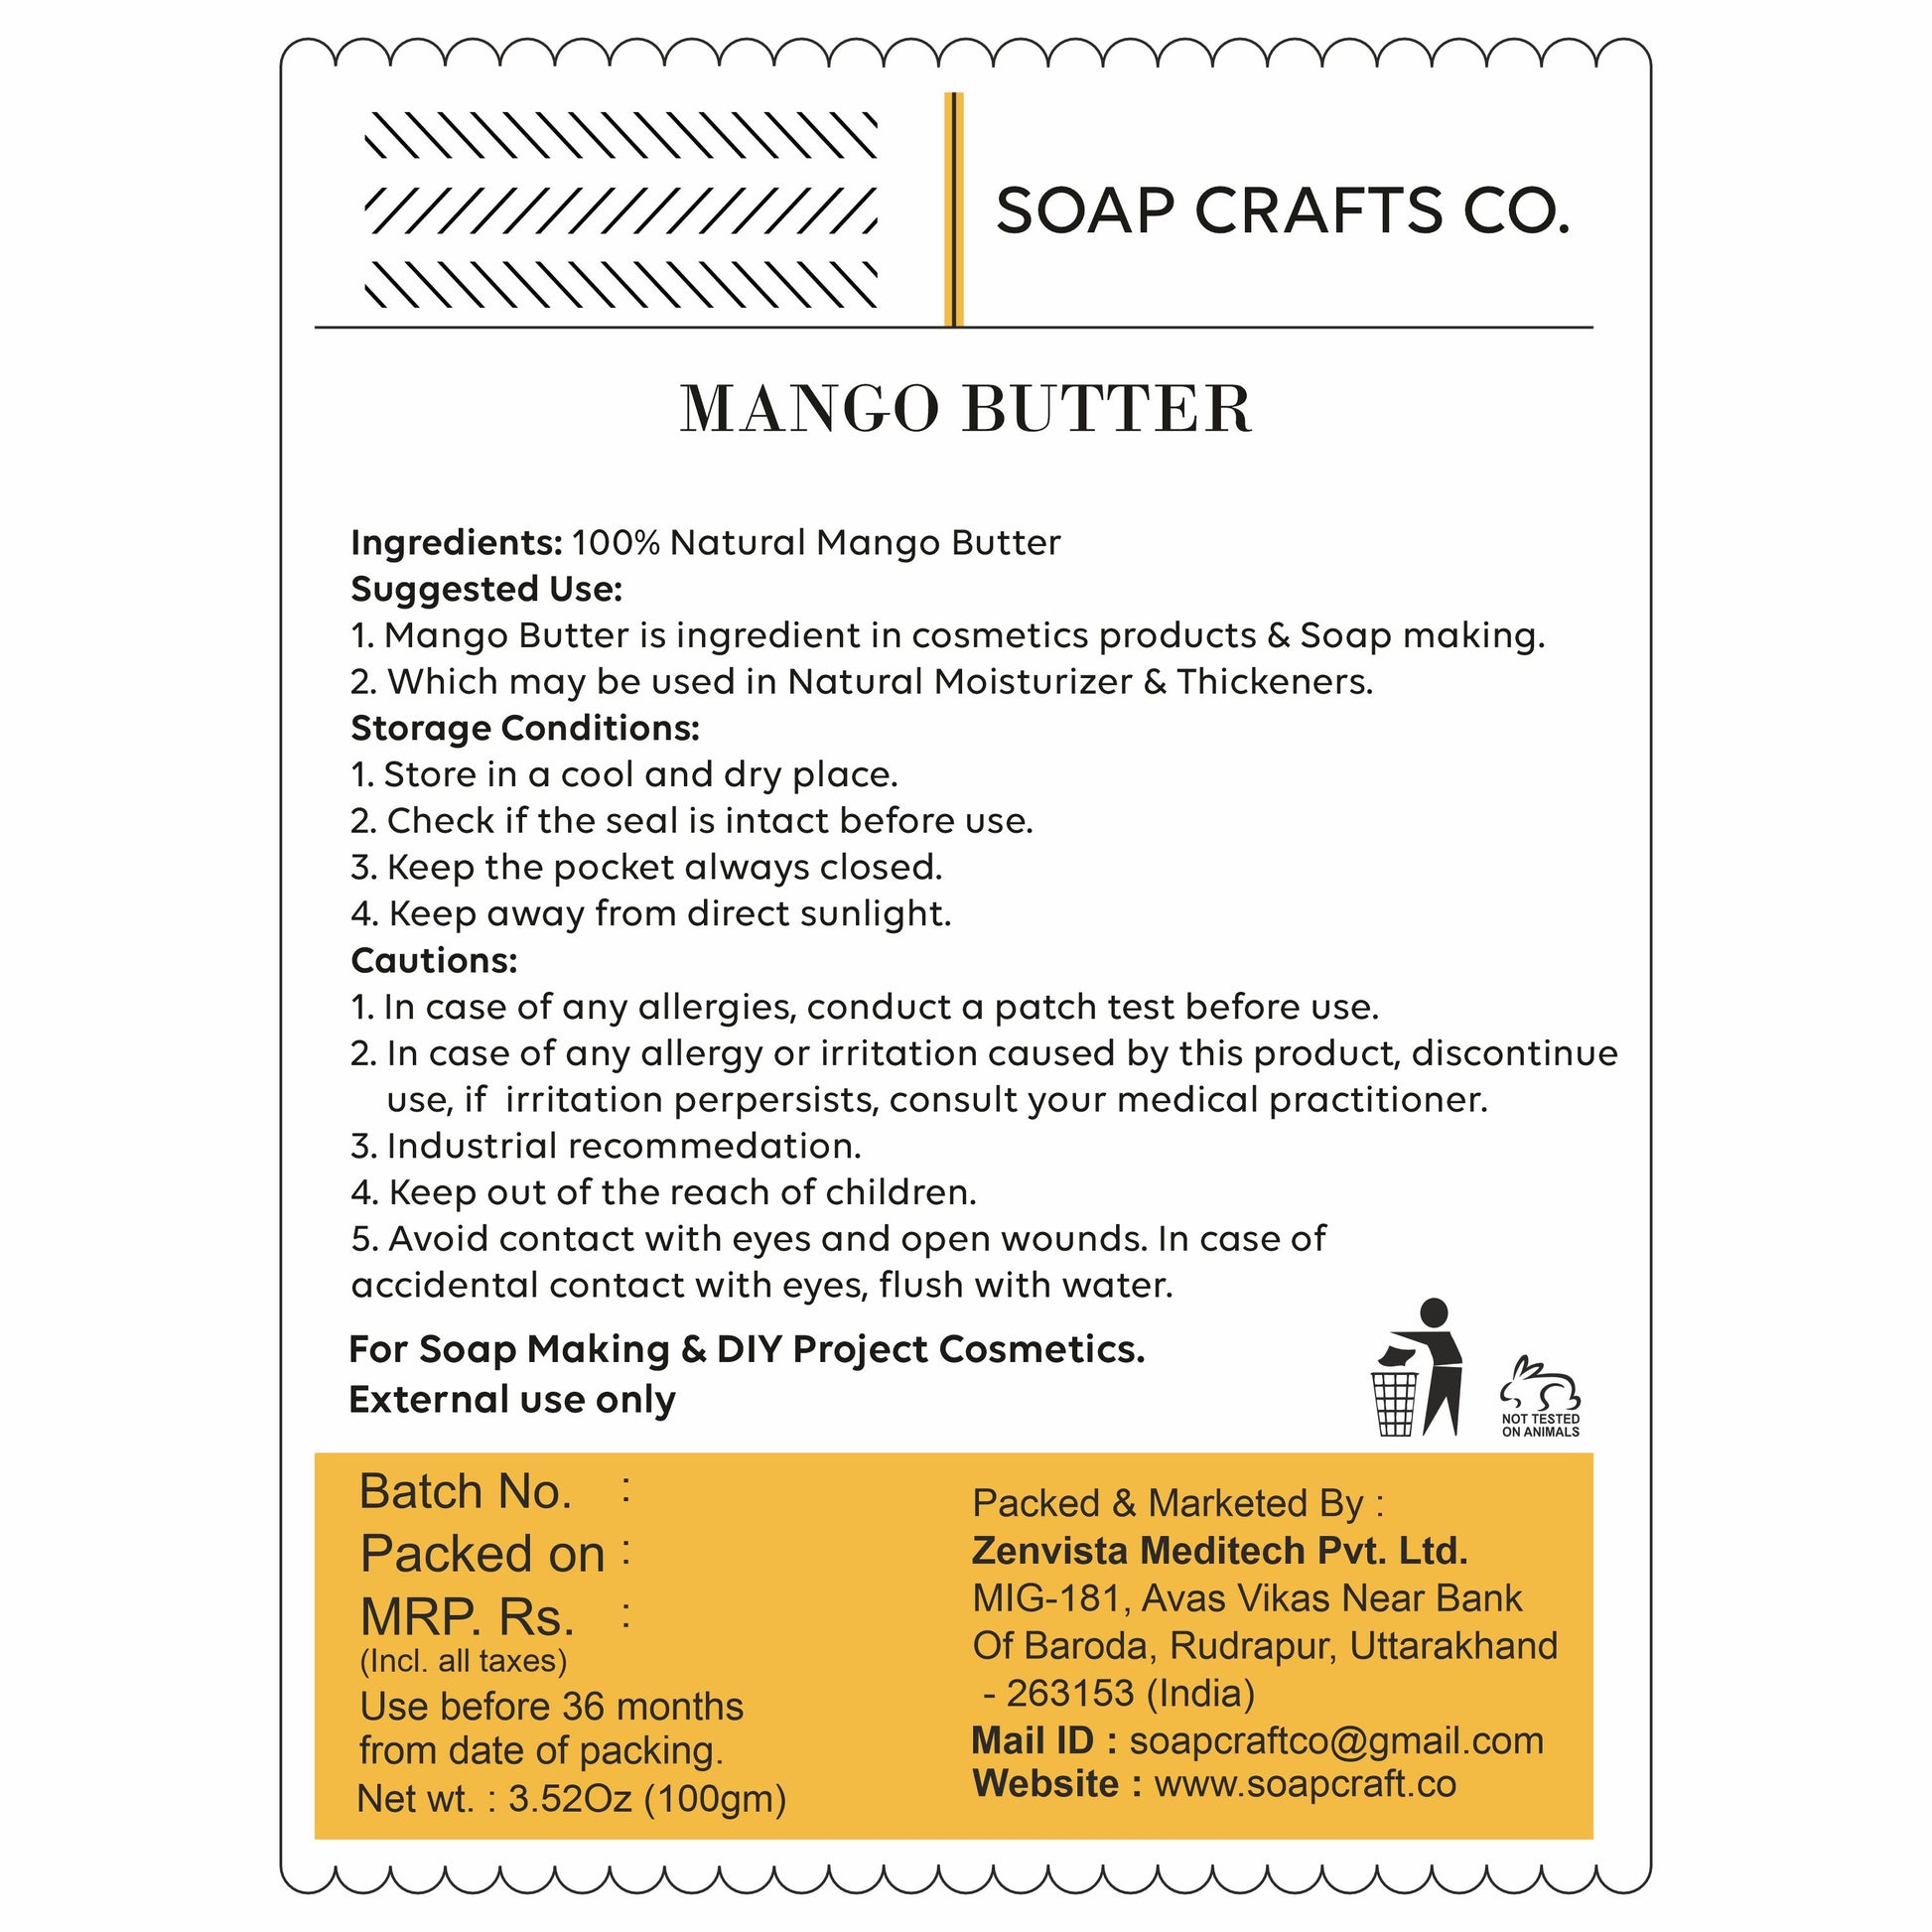 cosmeticmaking, saopmaking, cosmeticmakingingredients, soapmakingingredients,cosmeticingredients,naturalingredients,organicingredients,veganingredients, essentialoils,fragranceoils,carrieroils, carrieroils, butters, clays,botanicals,herbs,preservatives,emulsifiers,surfa ctants,thickeners, thickeners,exfoliants,butter, body butter, mango butter